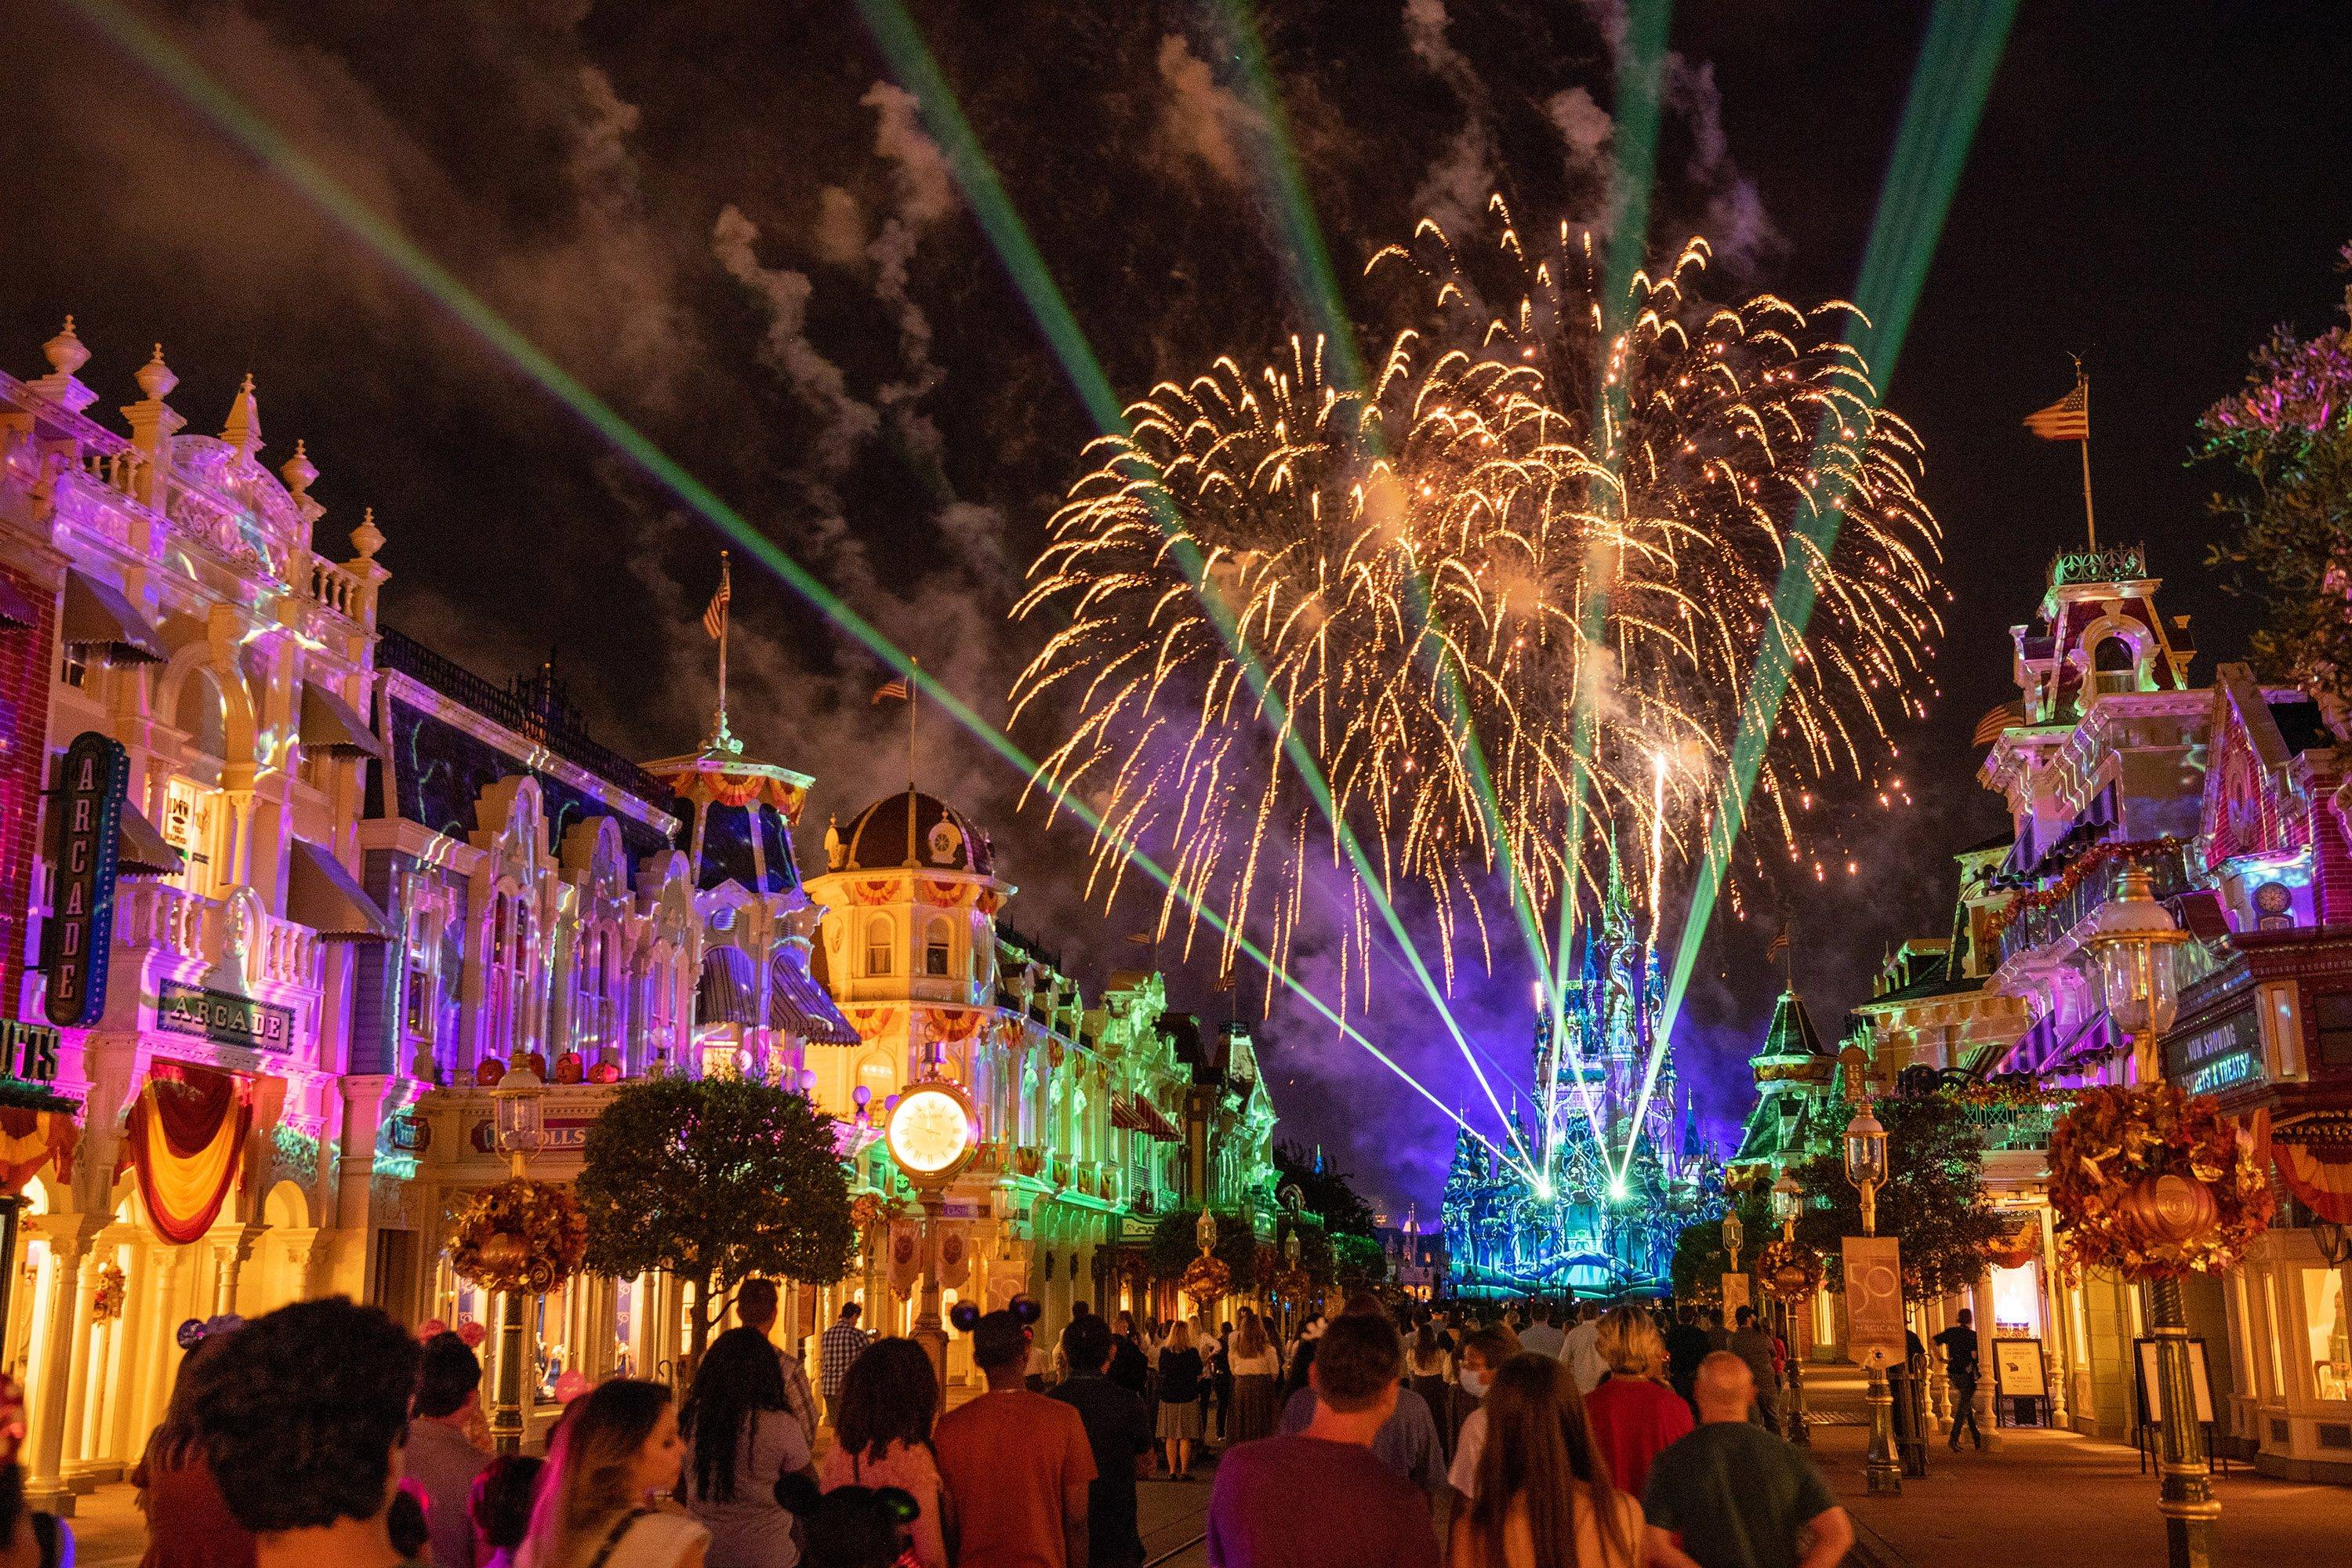 VIDEO - 'Disney Enchantment' makes its official guest debut on Magic Kingdom's 50th anniversary